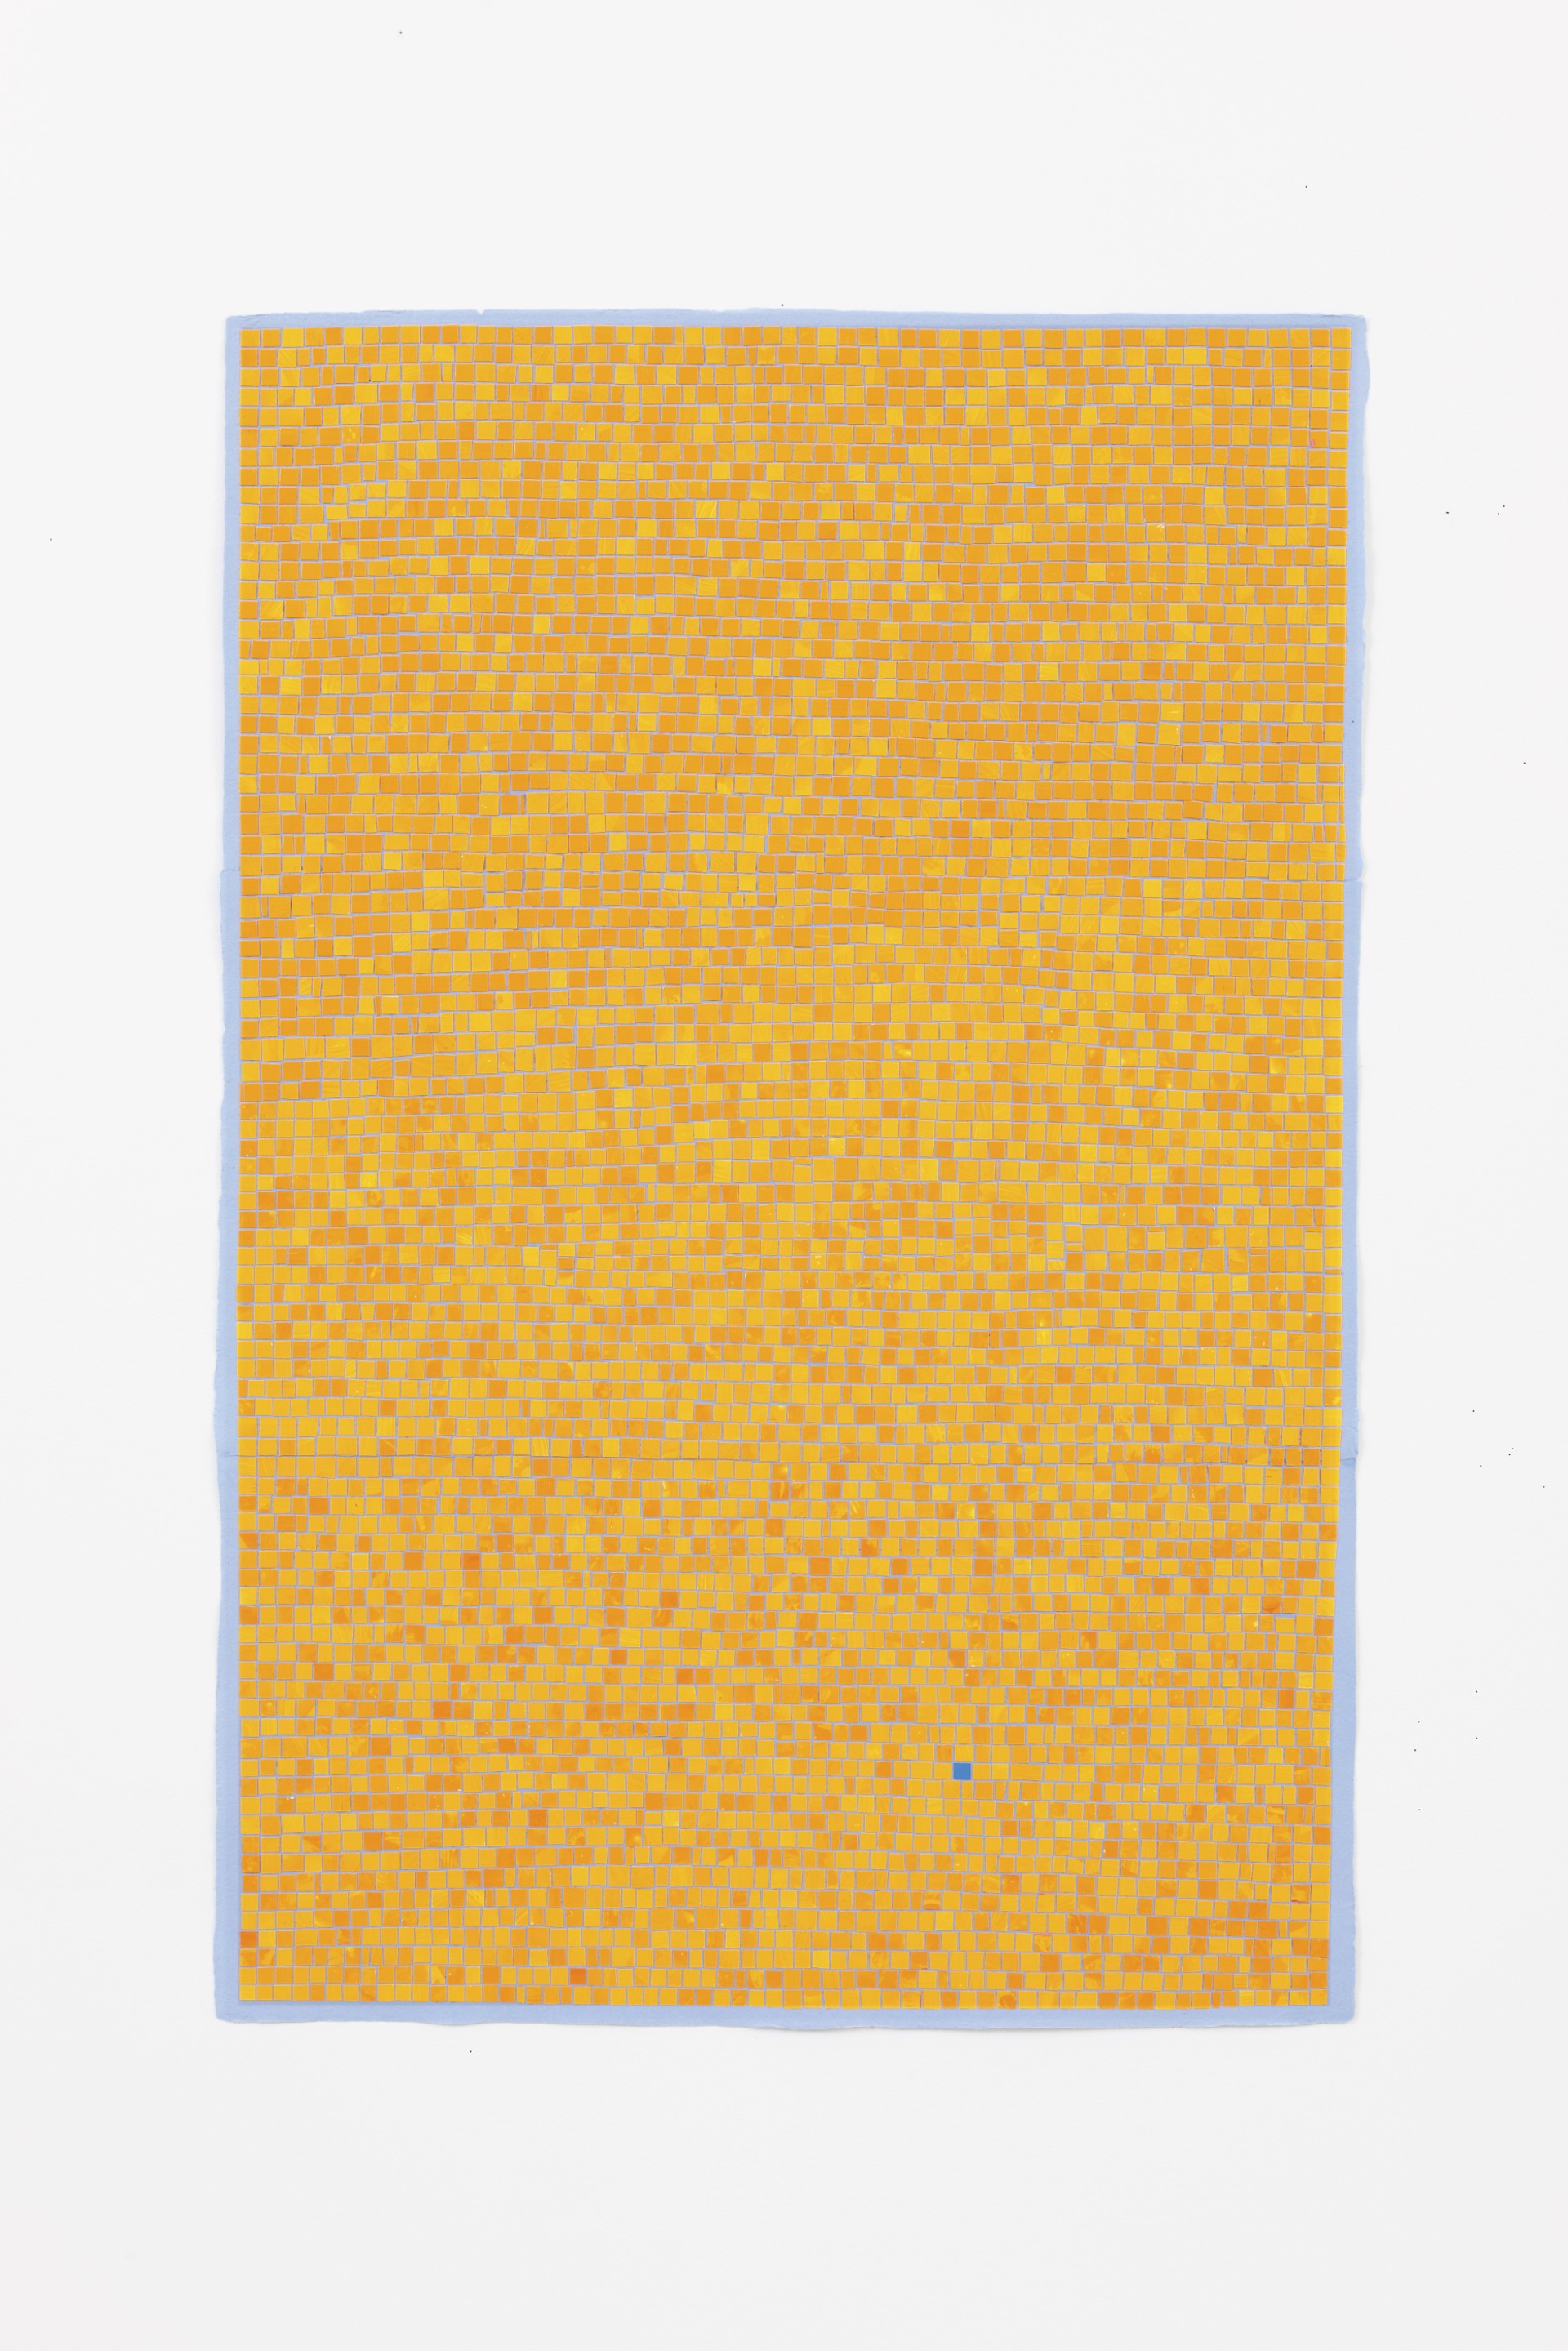 Untitled (Large Yellow Squares) by Leigh Suggs